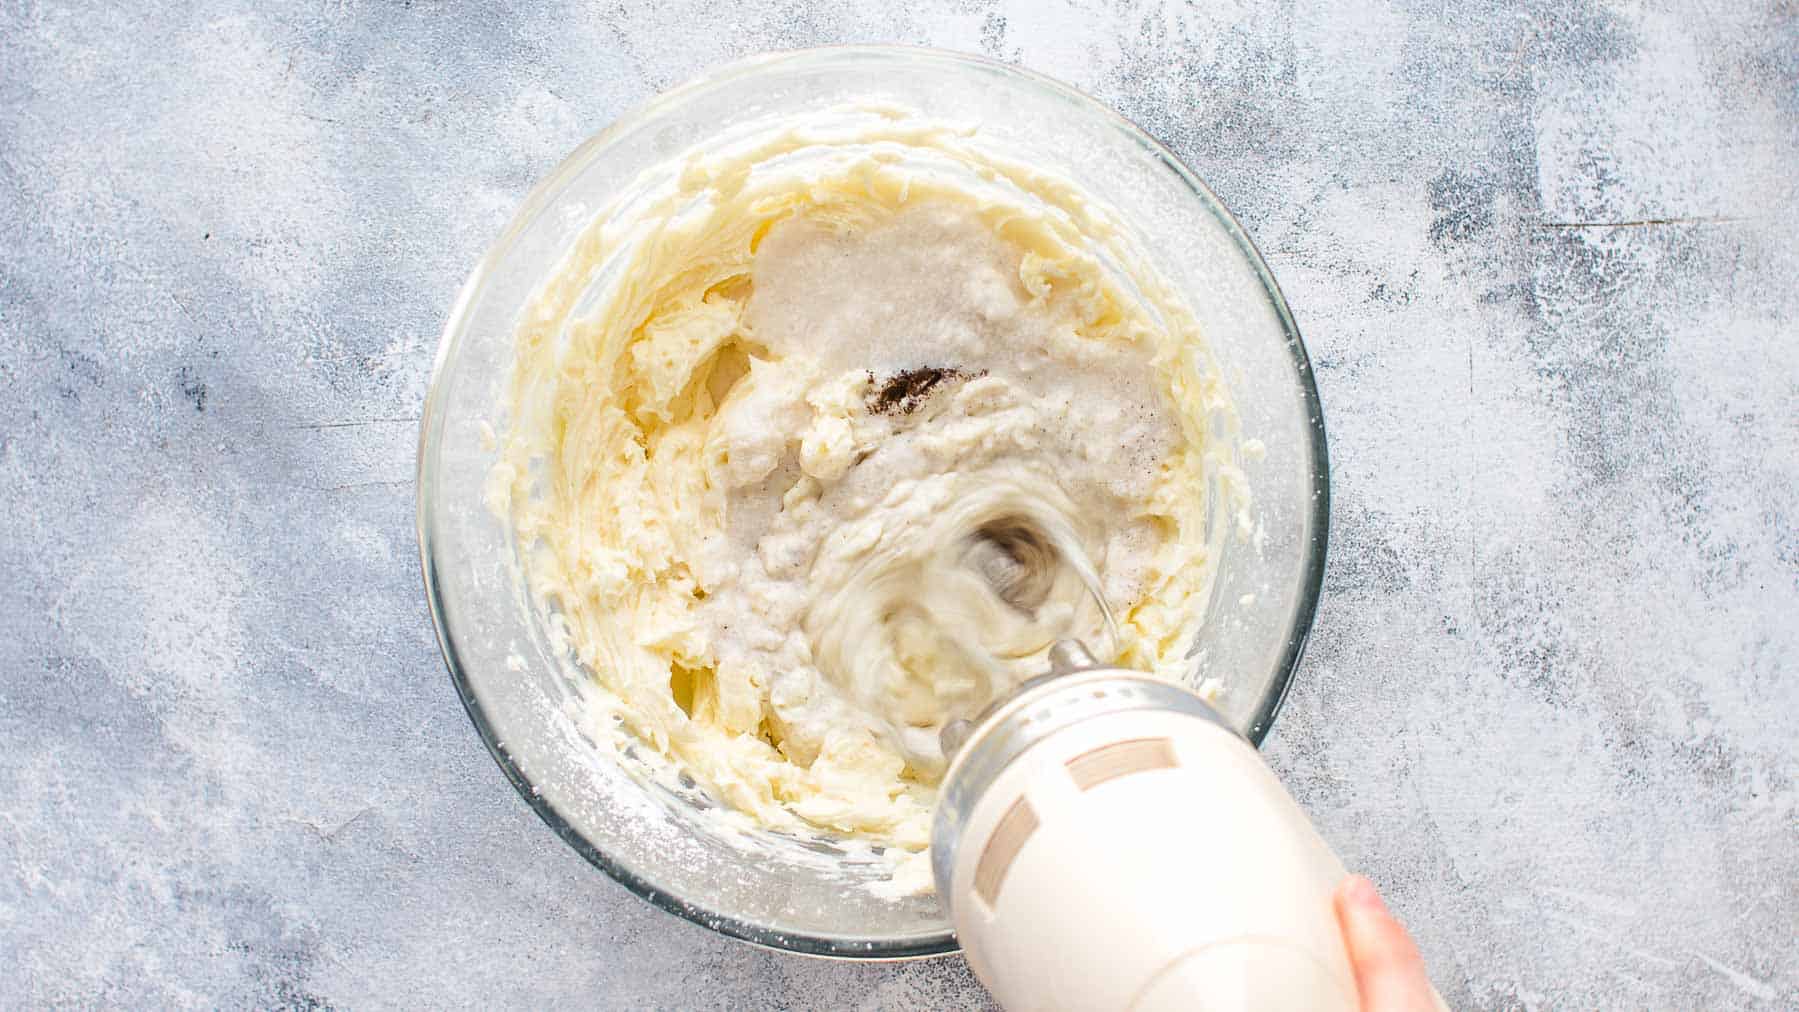 Adding coconut milk and vanilla to the frosting